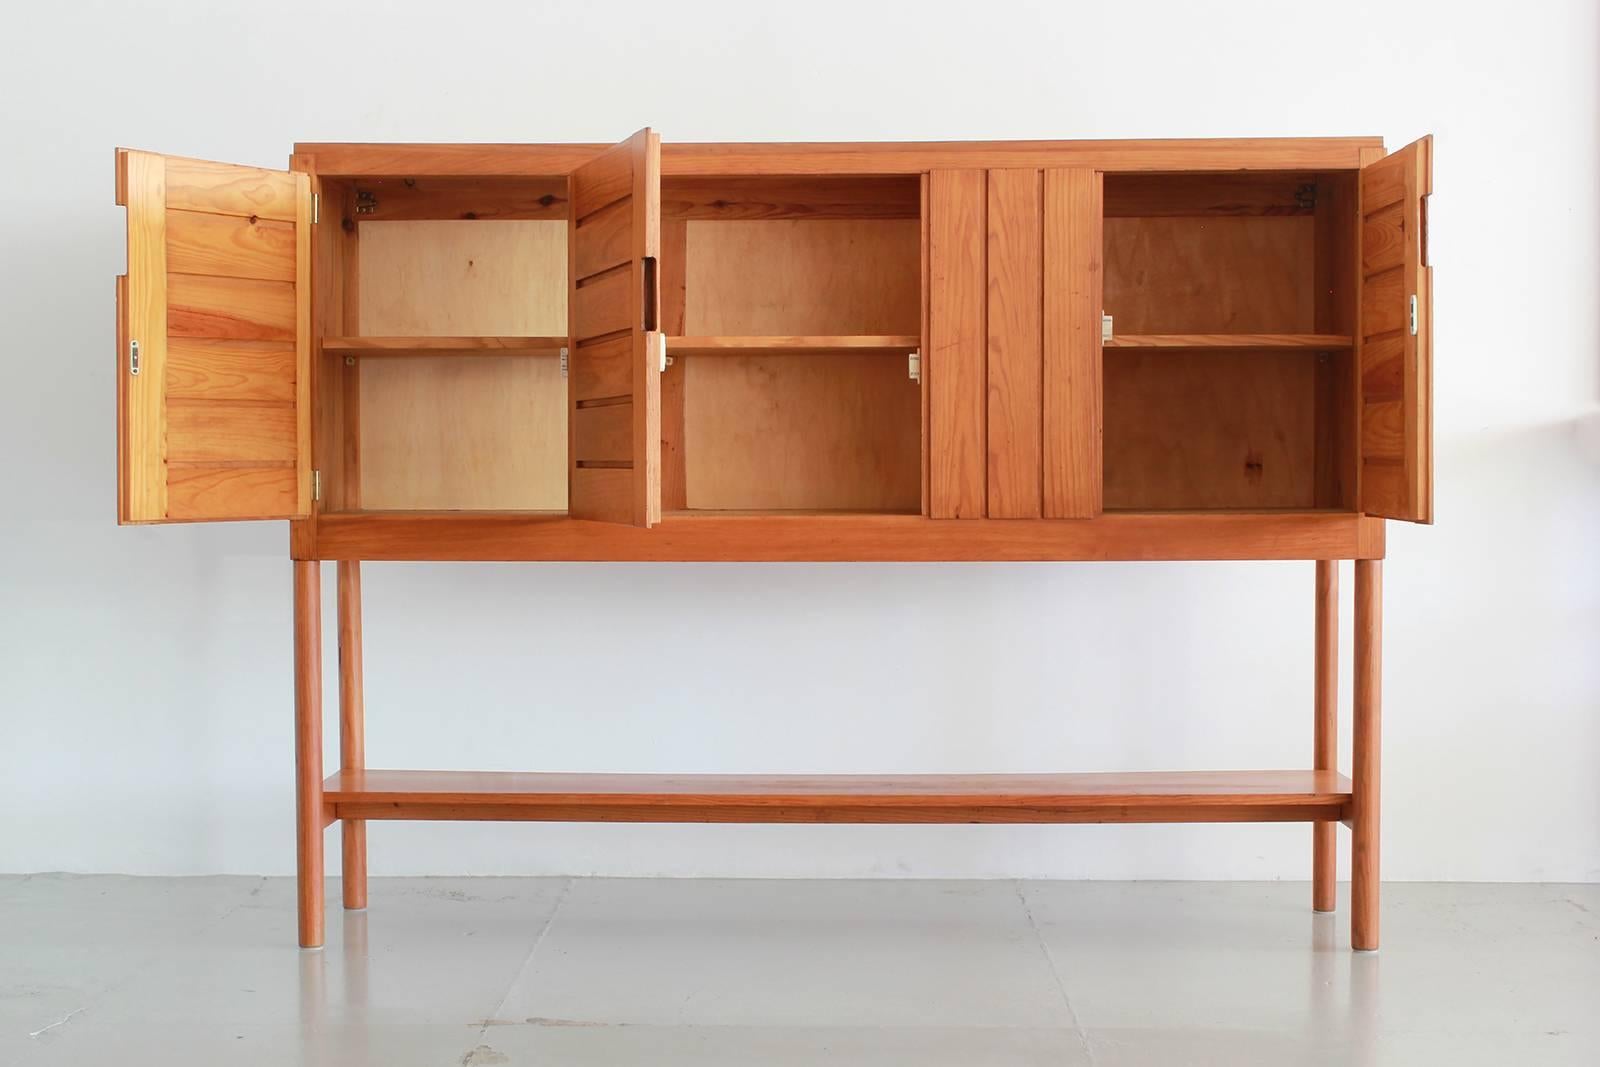 Wonderful French buffet designed by Pierre Gautier-Delaye.
Constructed in 1957, pine with original patina - opens with three doors with interior shelving.
Fantastic piece!
             